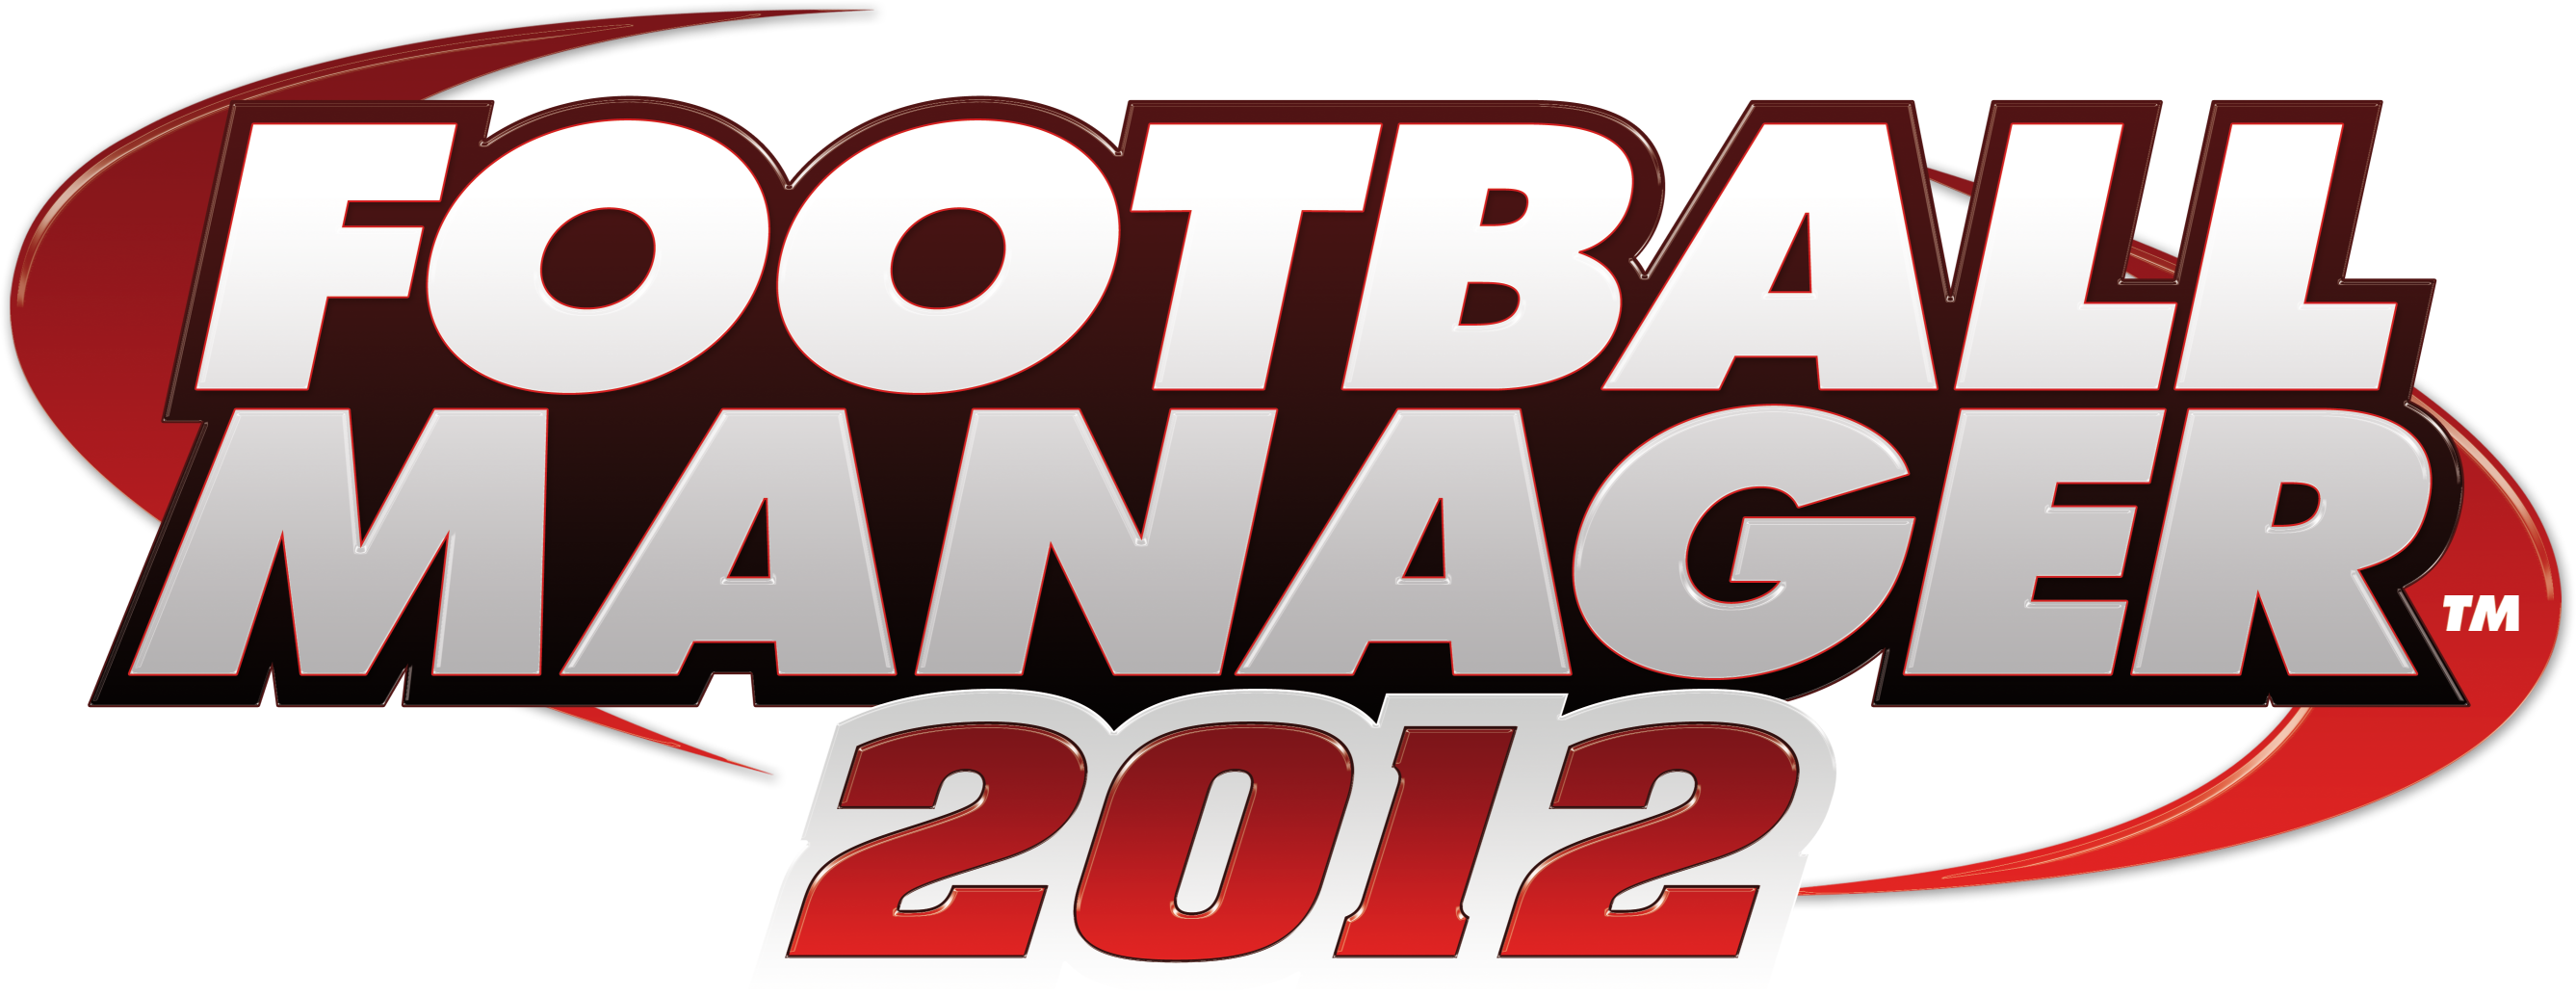 Football manager 2012 not steam фото 111